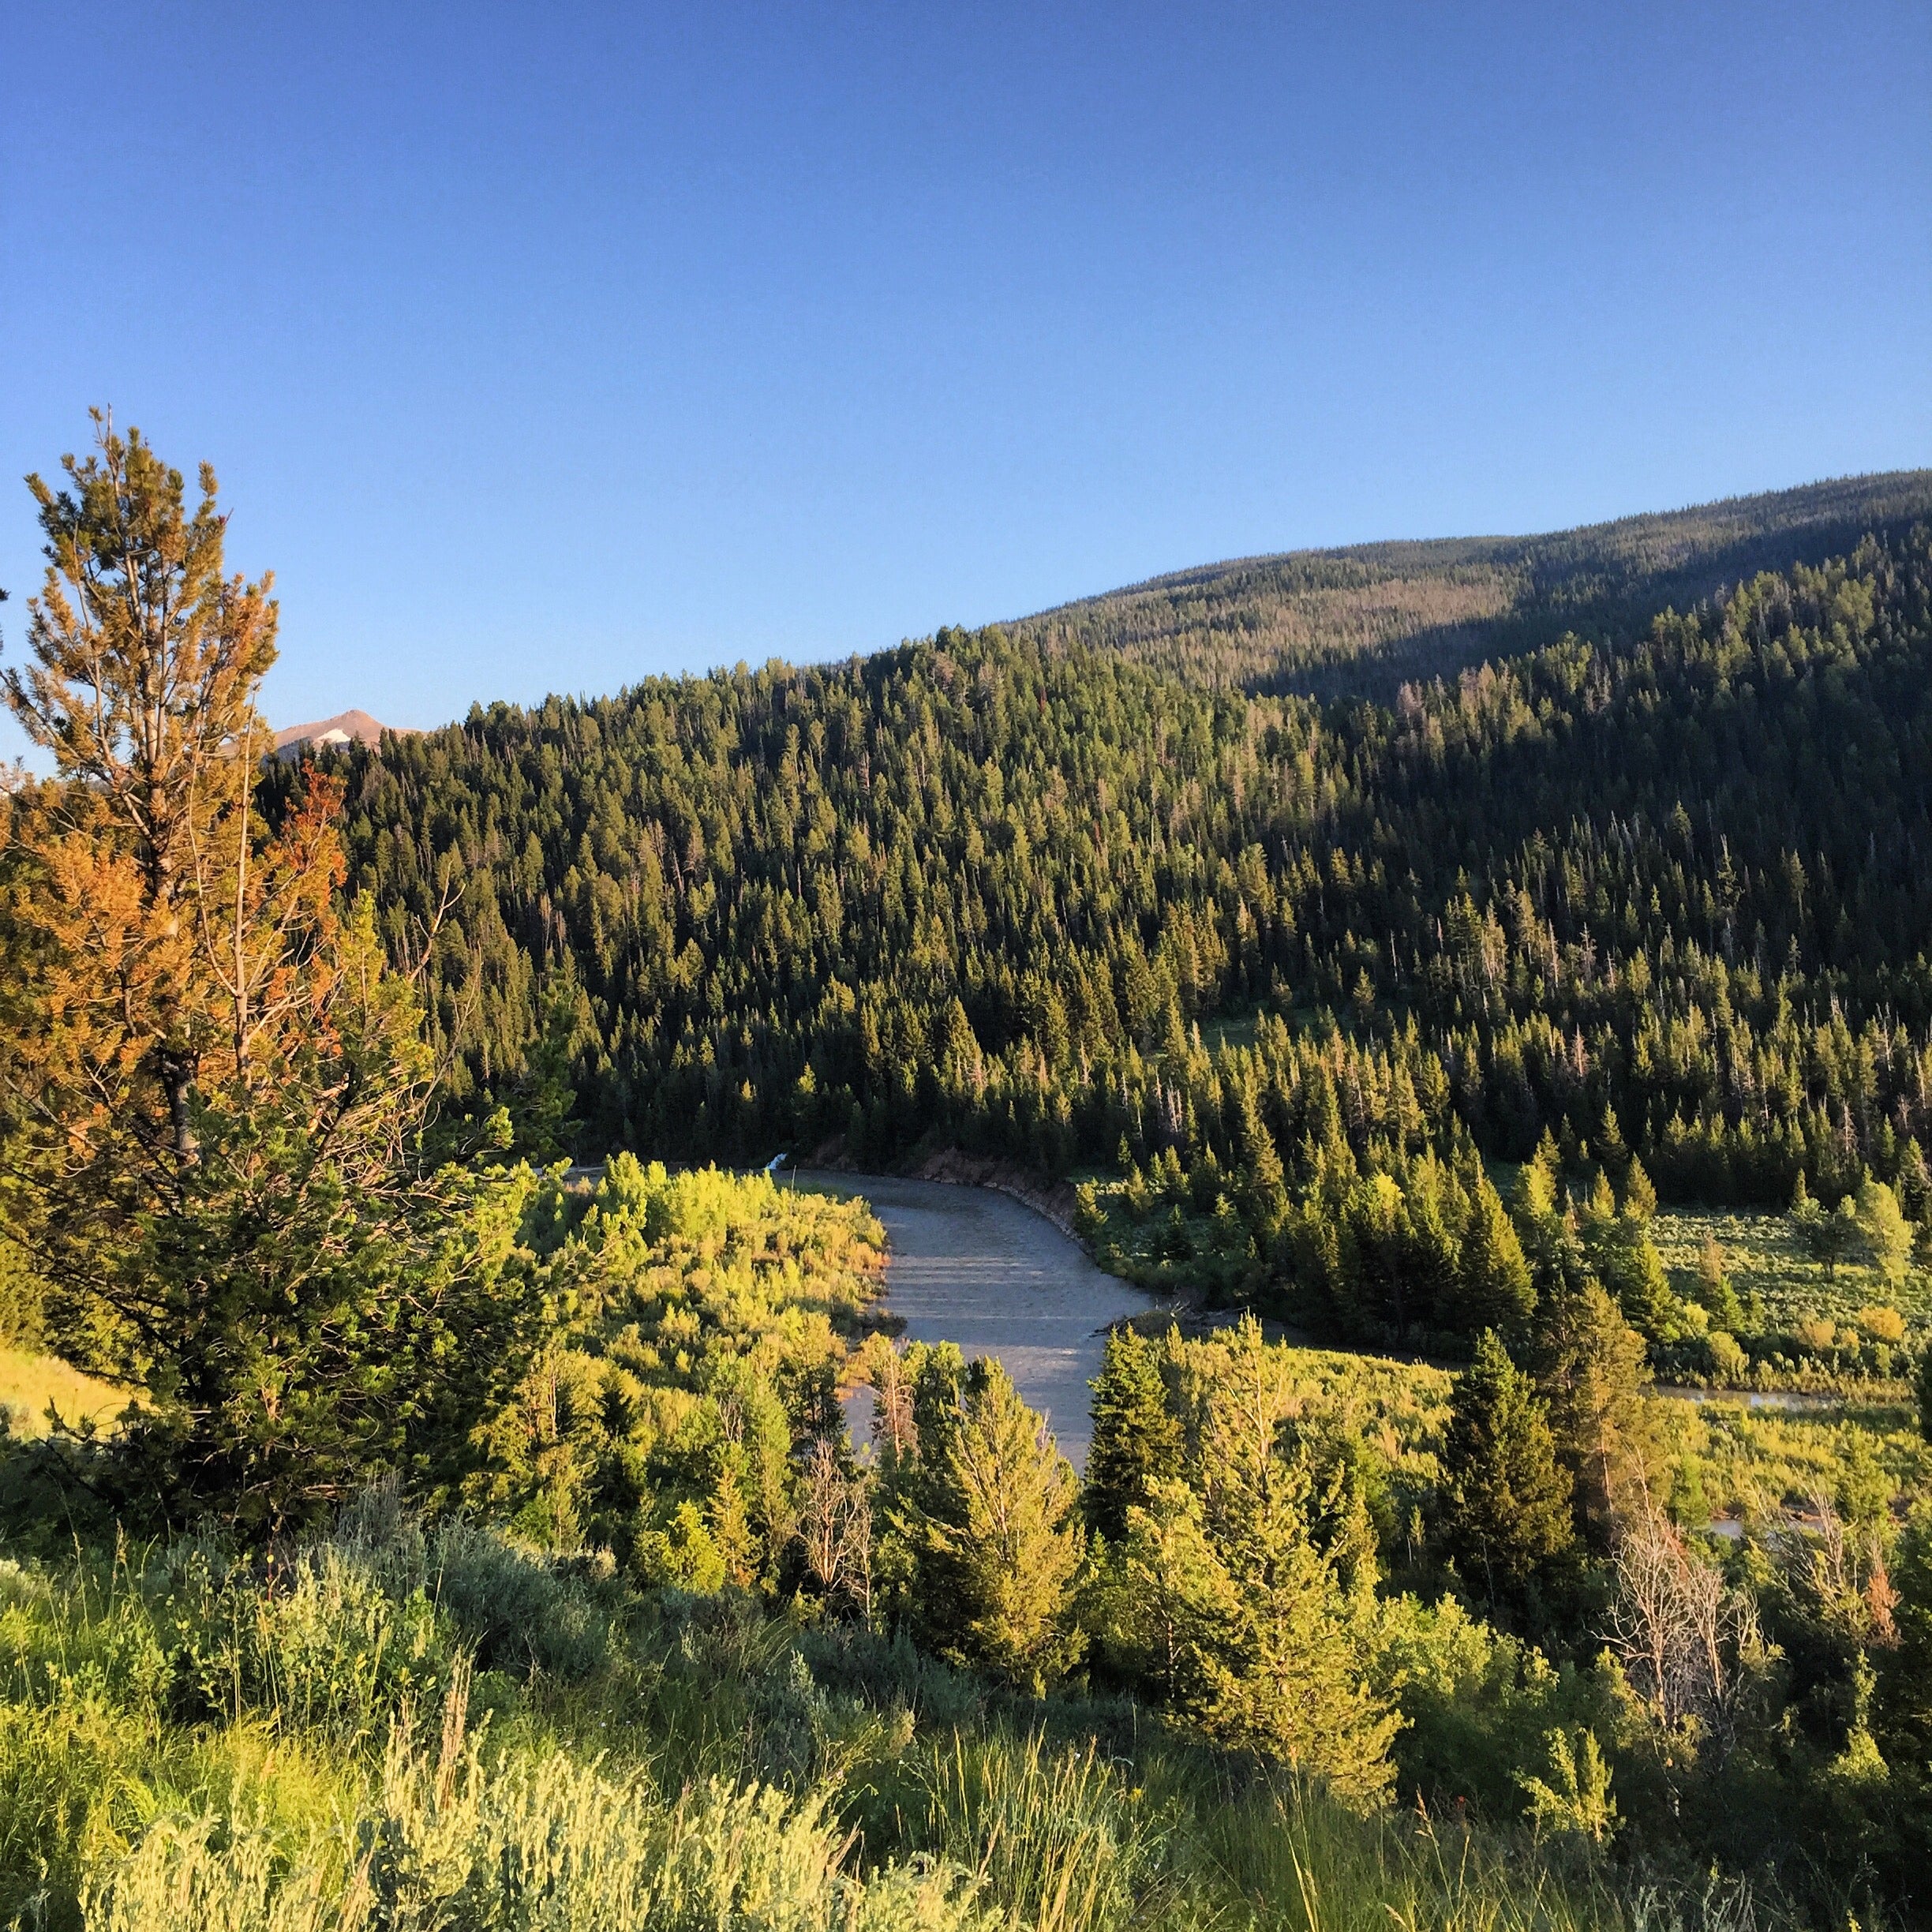 Camper submitted image from Gros Ventre Wilderness - 2